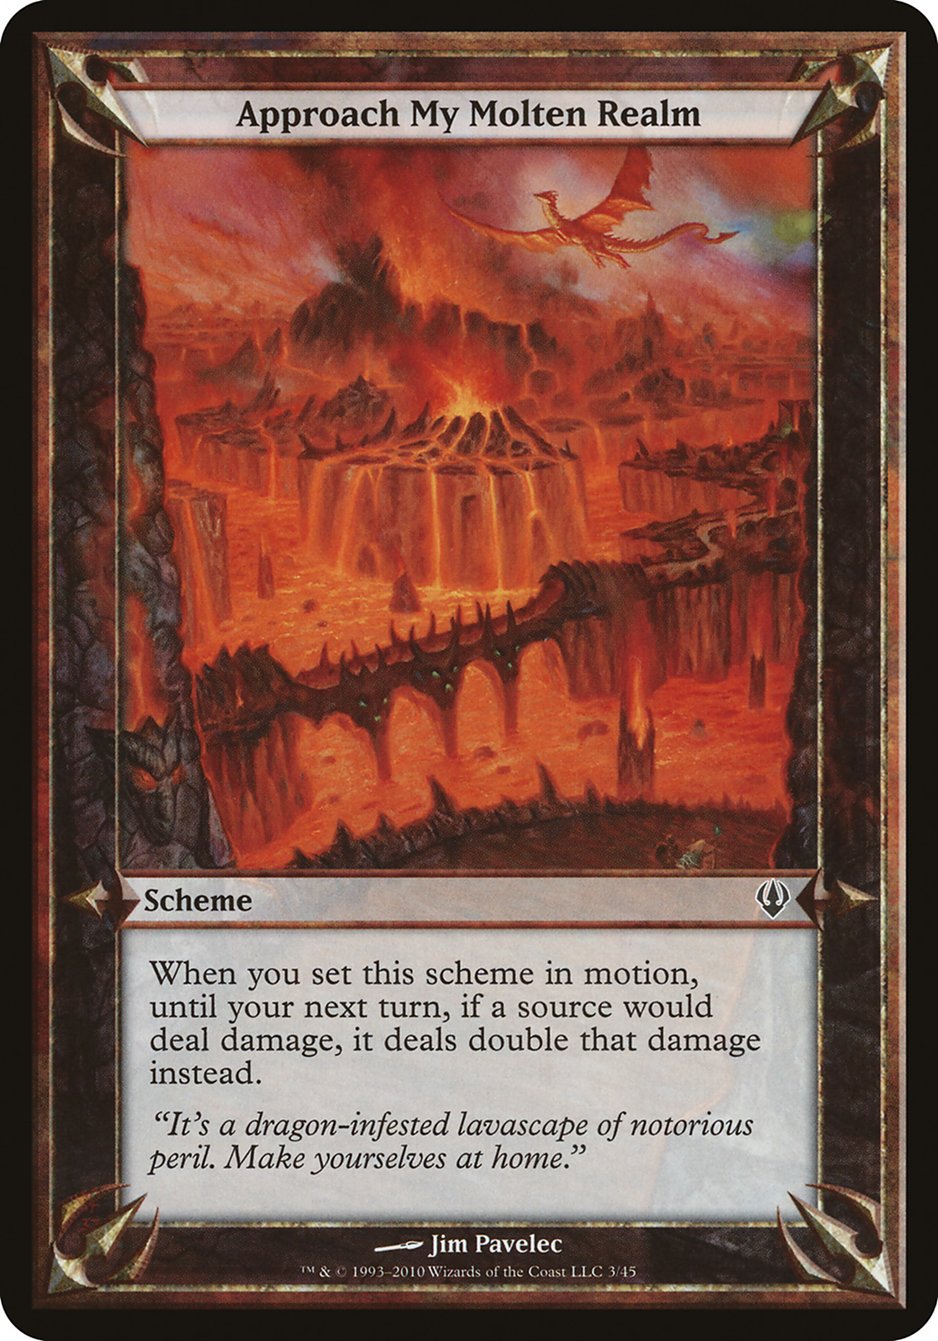 Approach My Molten Realm - MTG Card versions